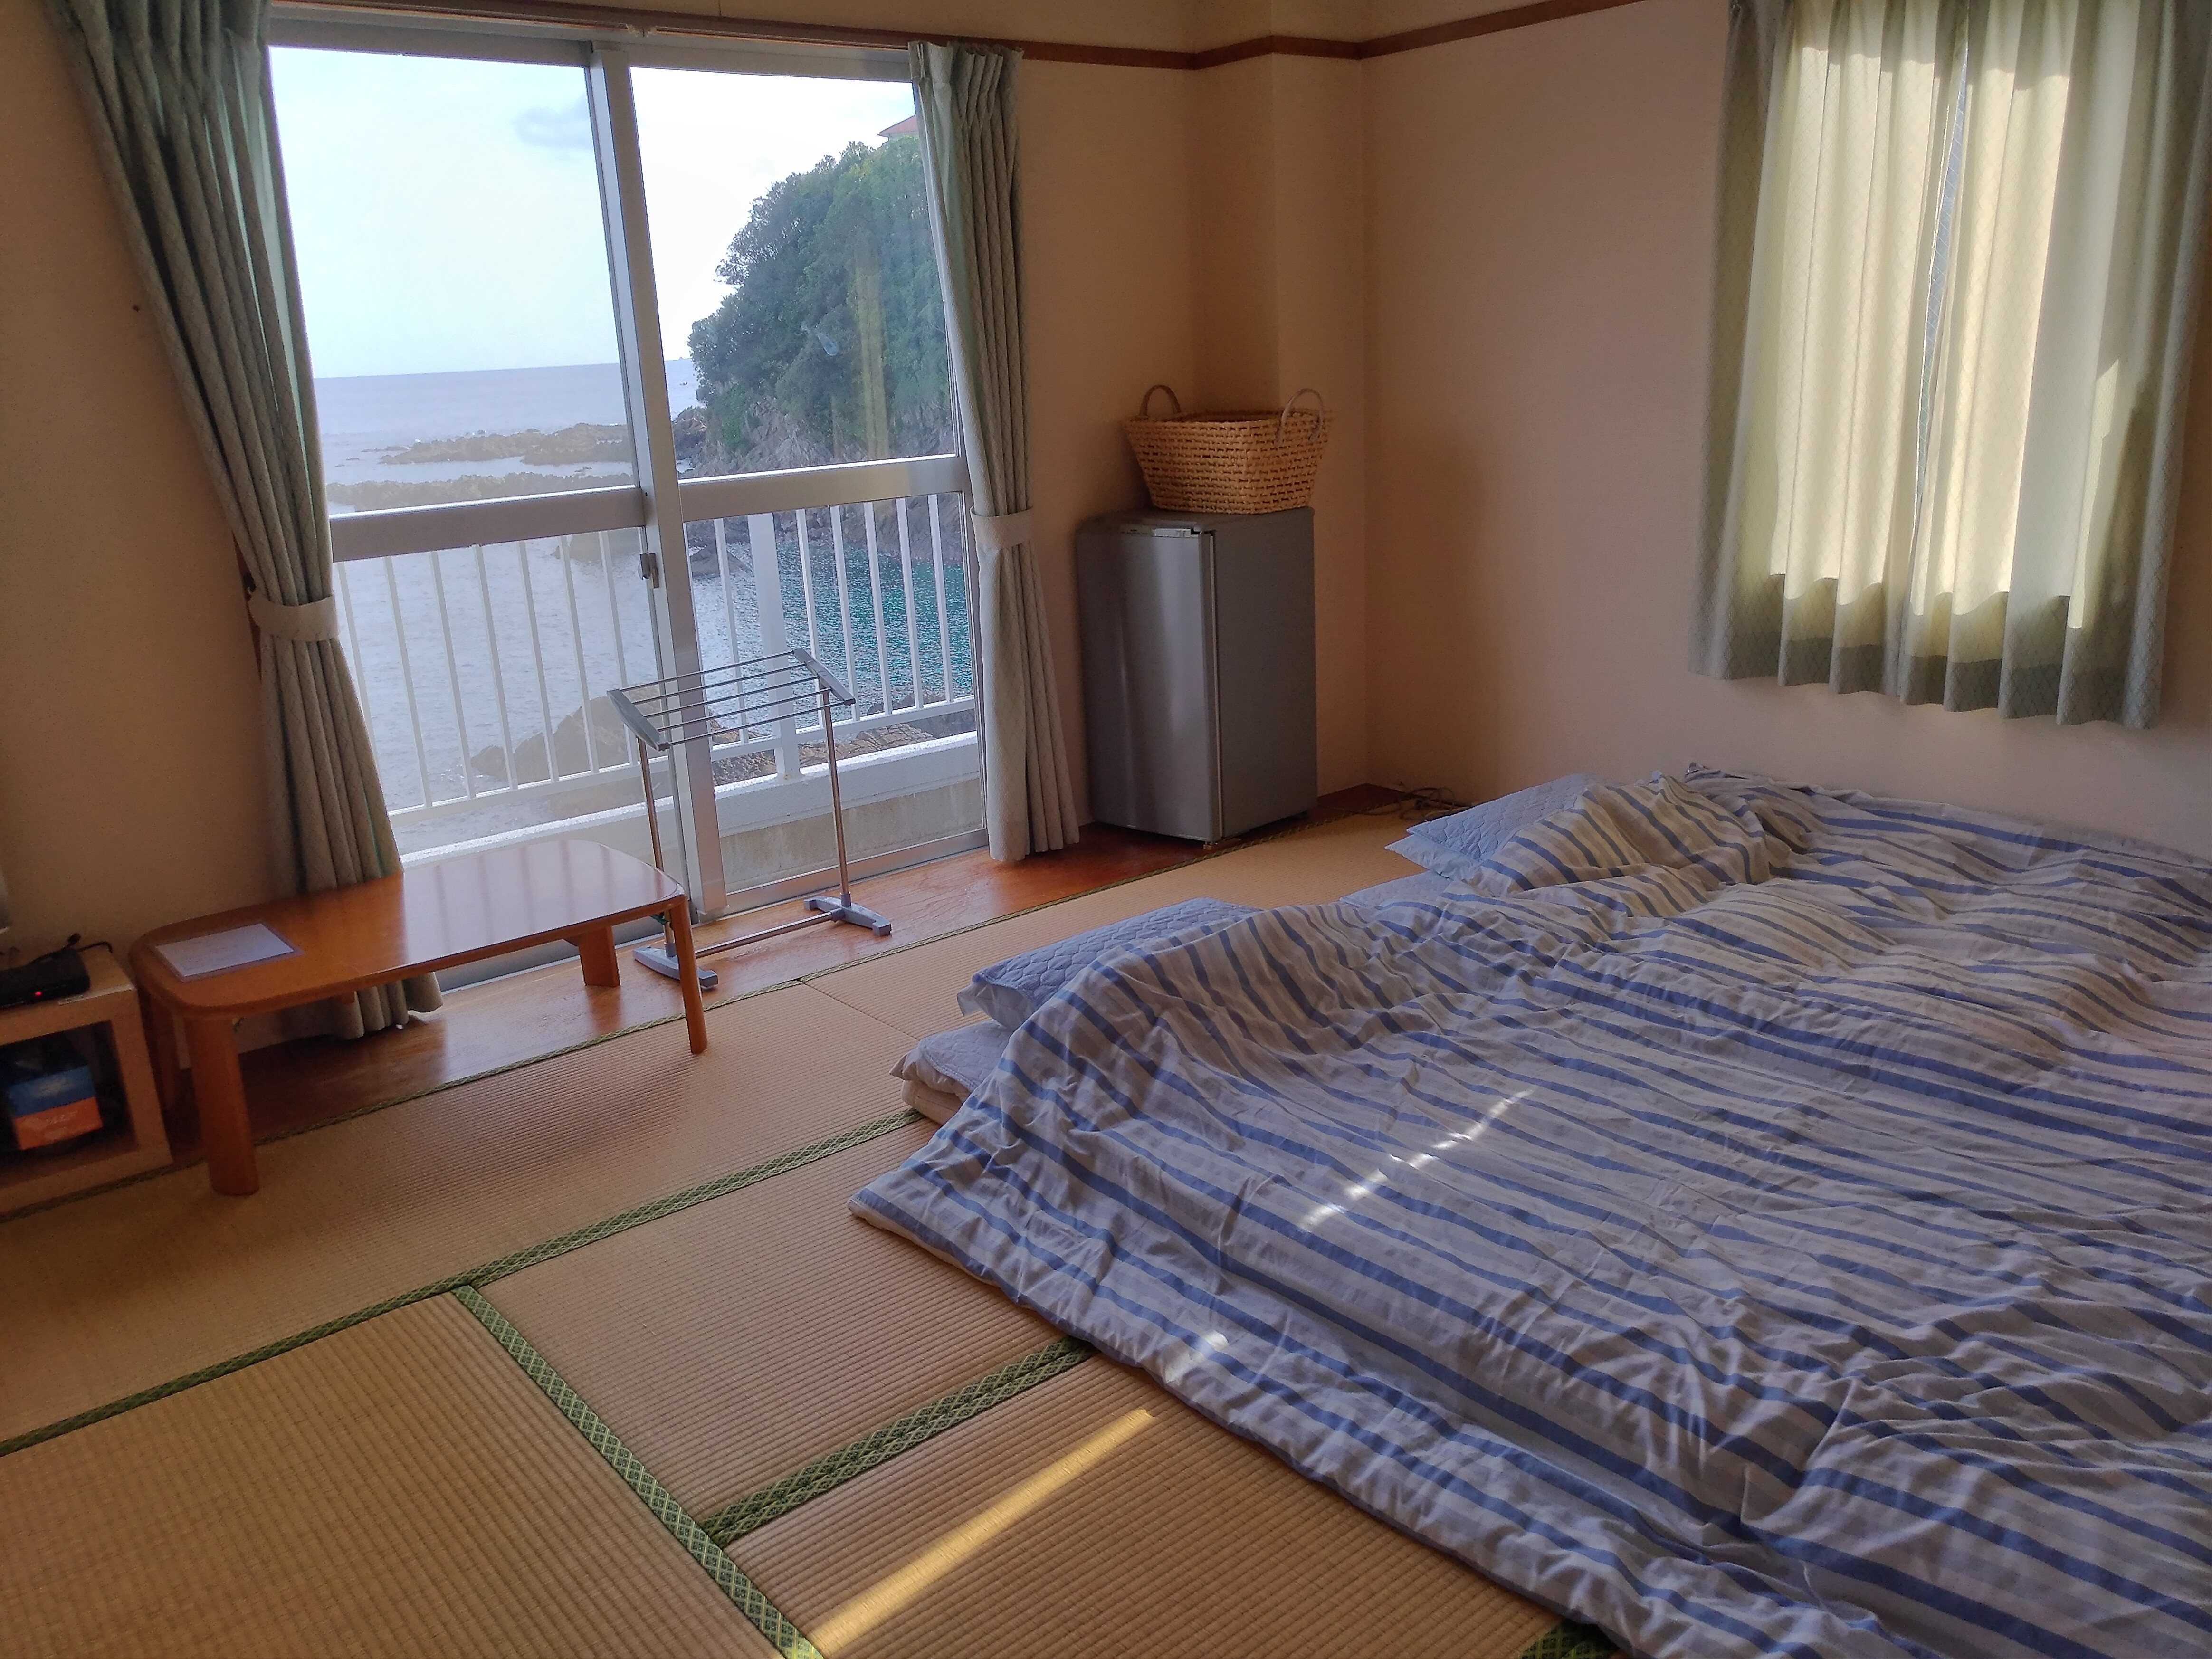 Japanese-style room for 4 people